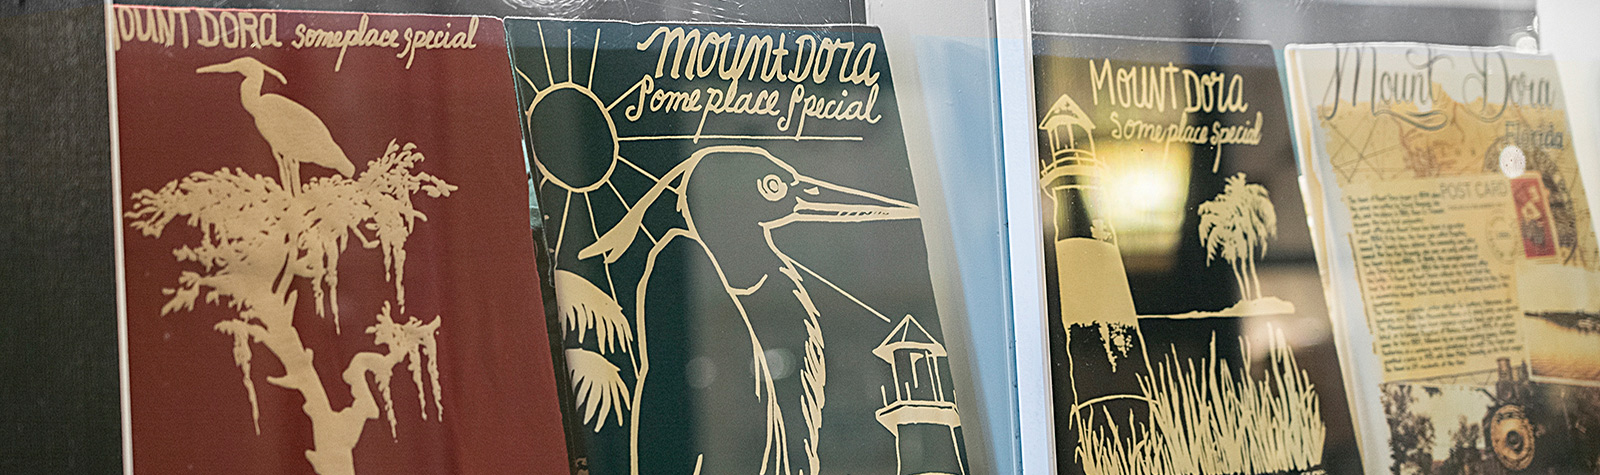 boutique window with artwork calling Mount Dora someplace special